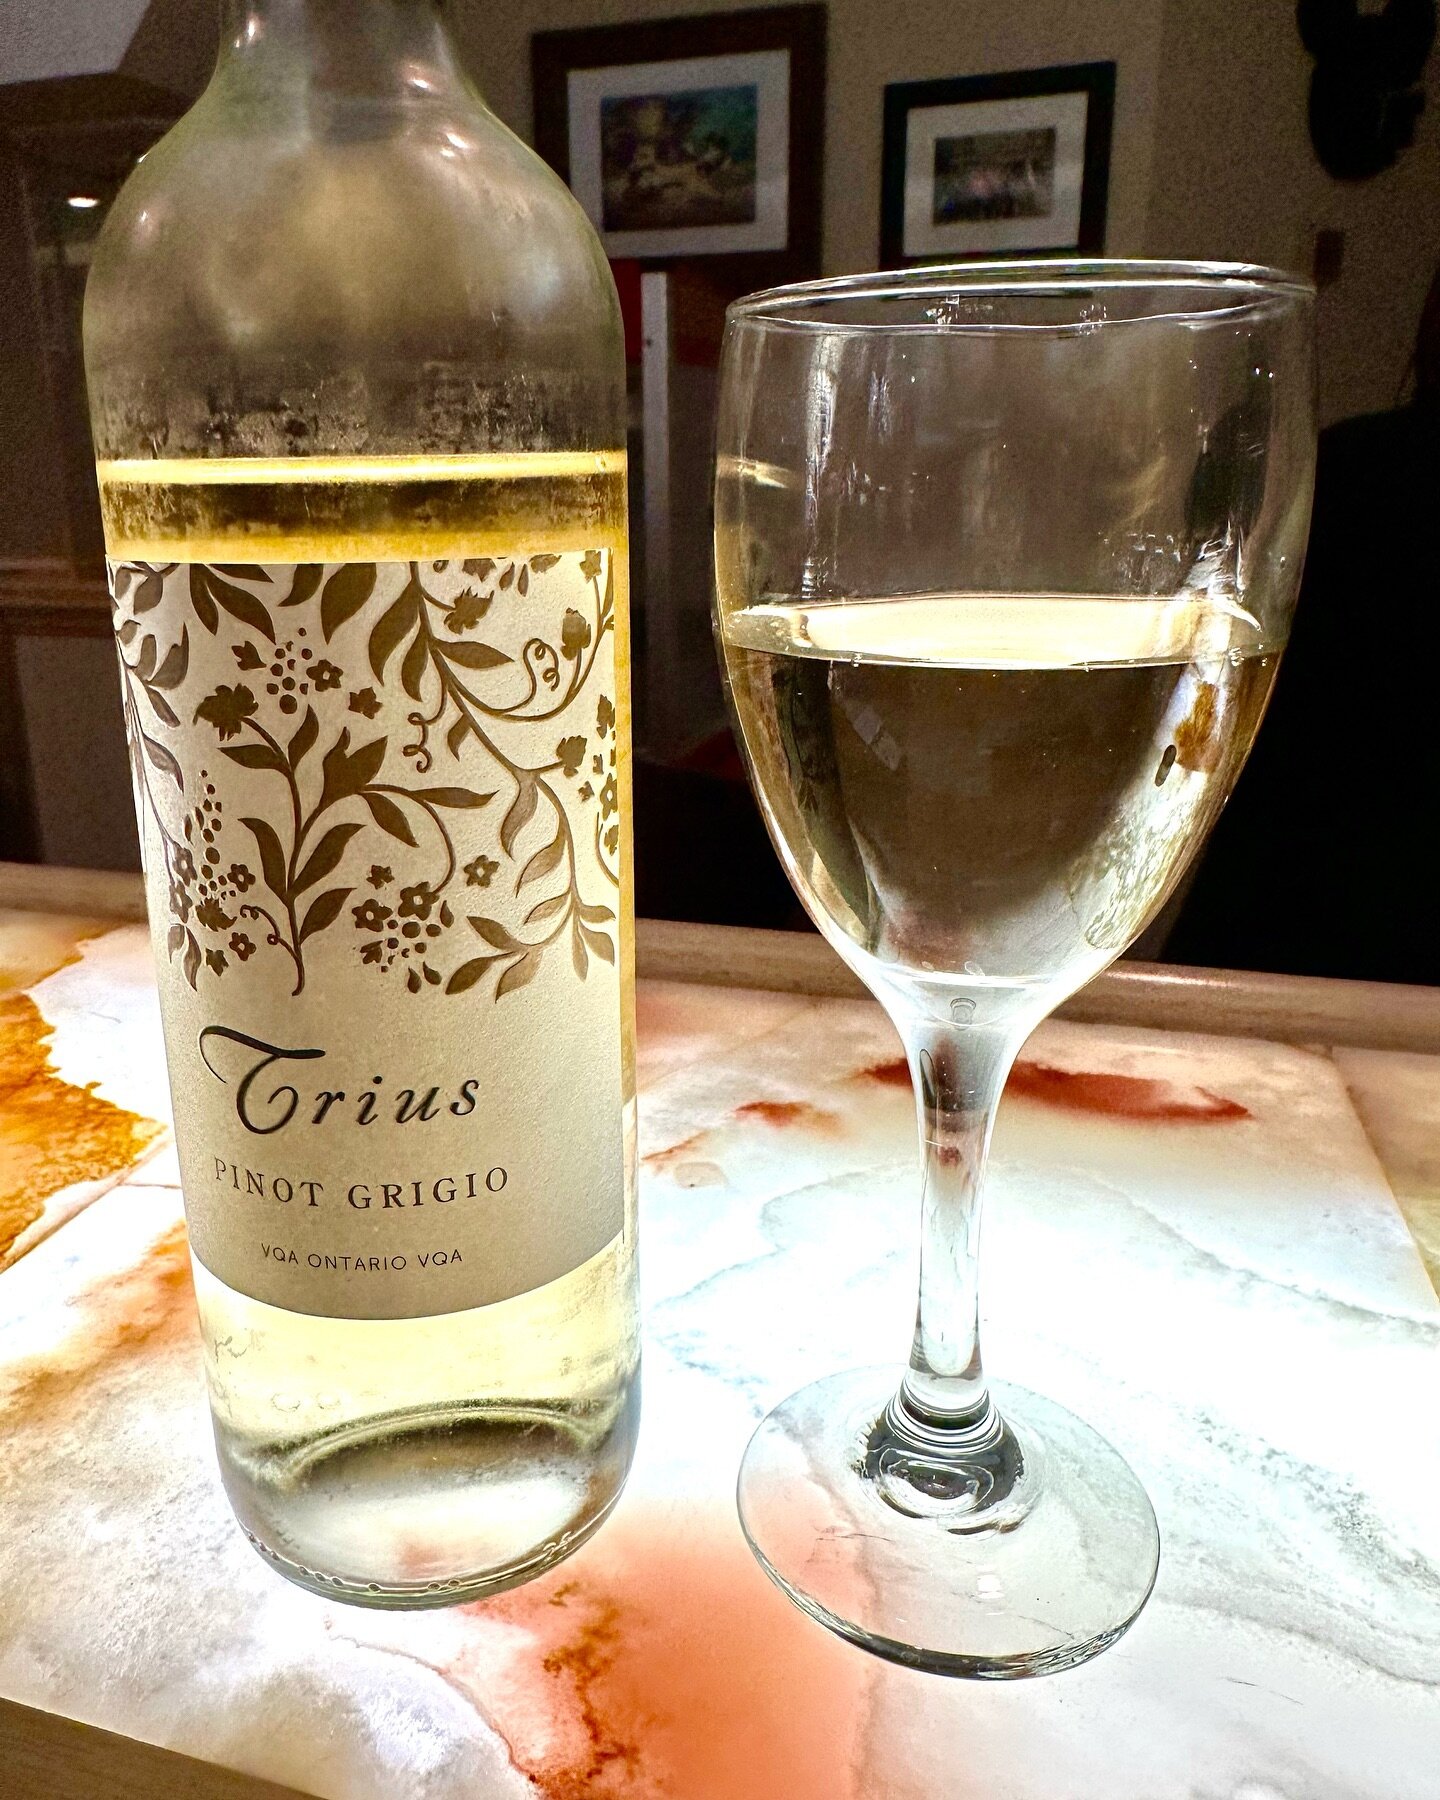 Kicking off New Year&rsquo;s Eve with a little Pinot Grigio.

#newyearseve #wine #triuswines #pinotgrigio #whitewine